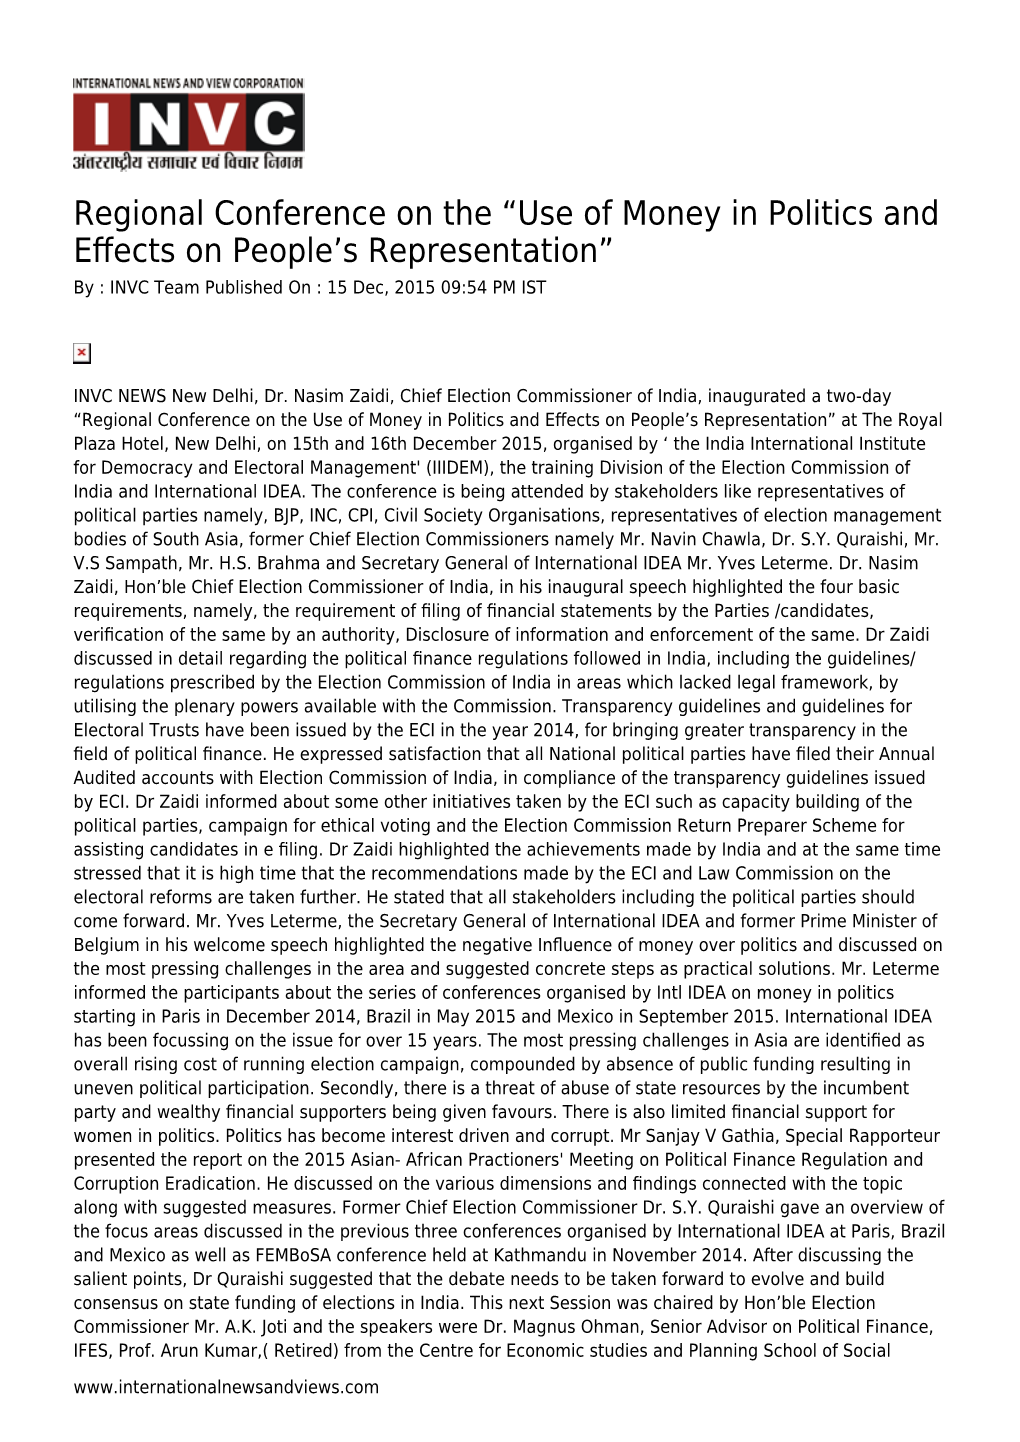 Use of Money in Politics and Effects on People's Representation